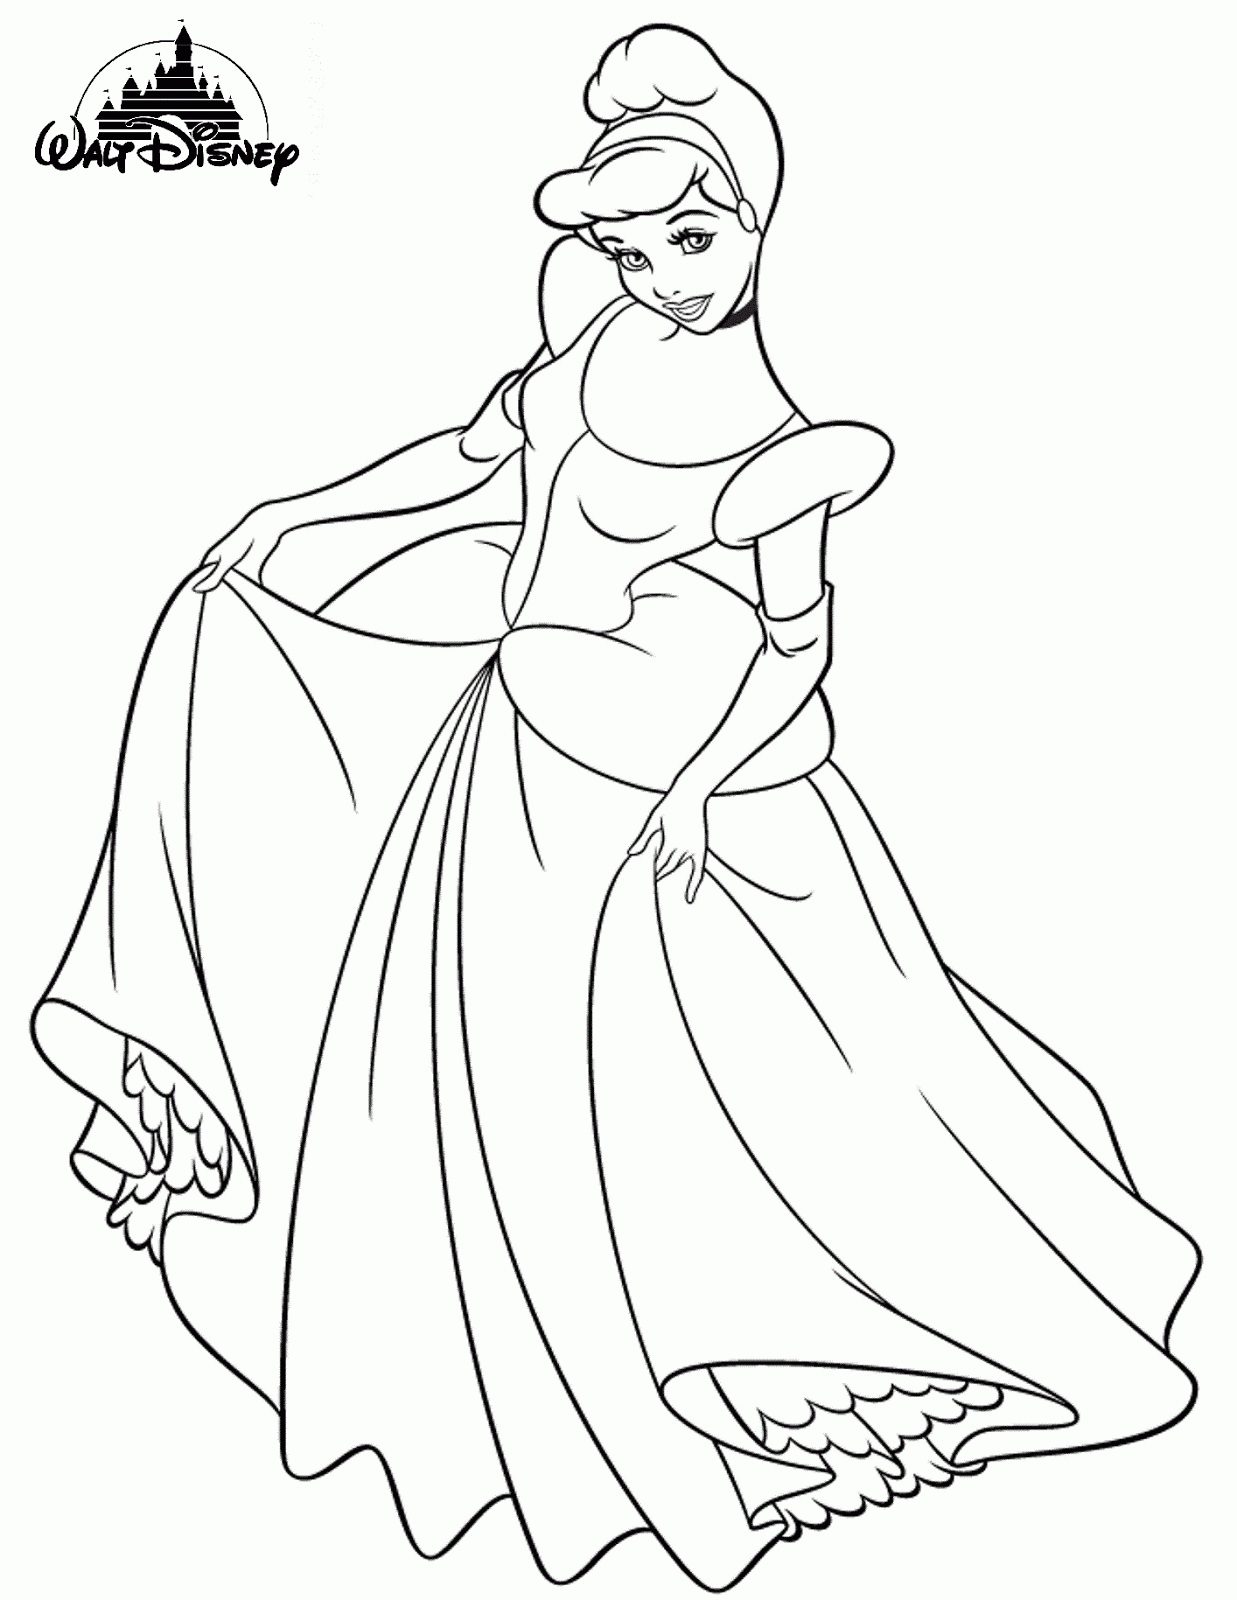 Disney Princess Cinderella Colouring Pages for Print